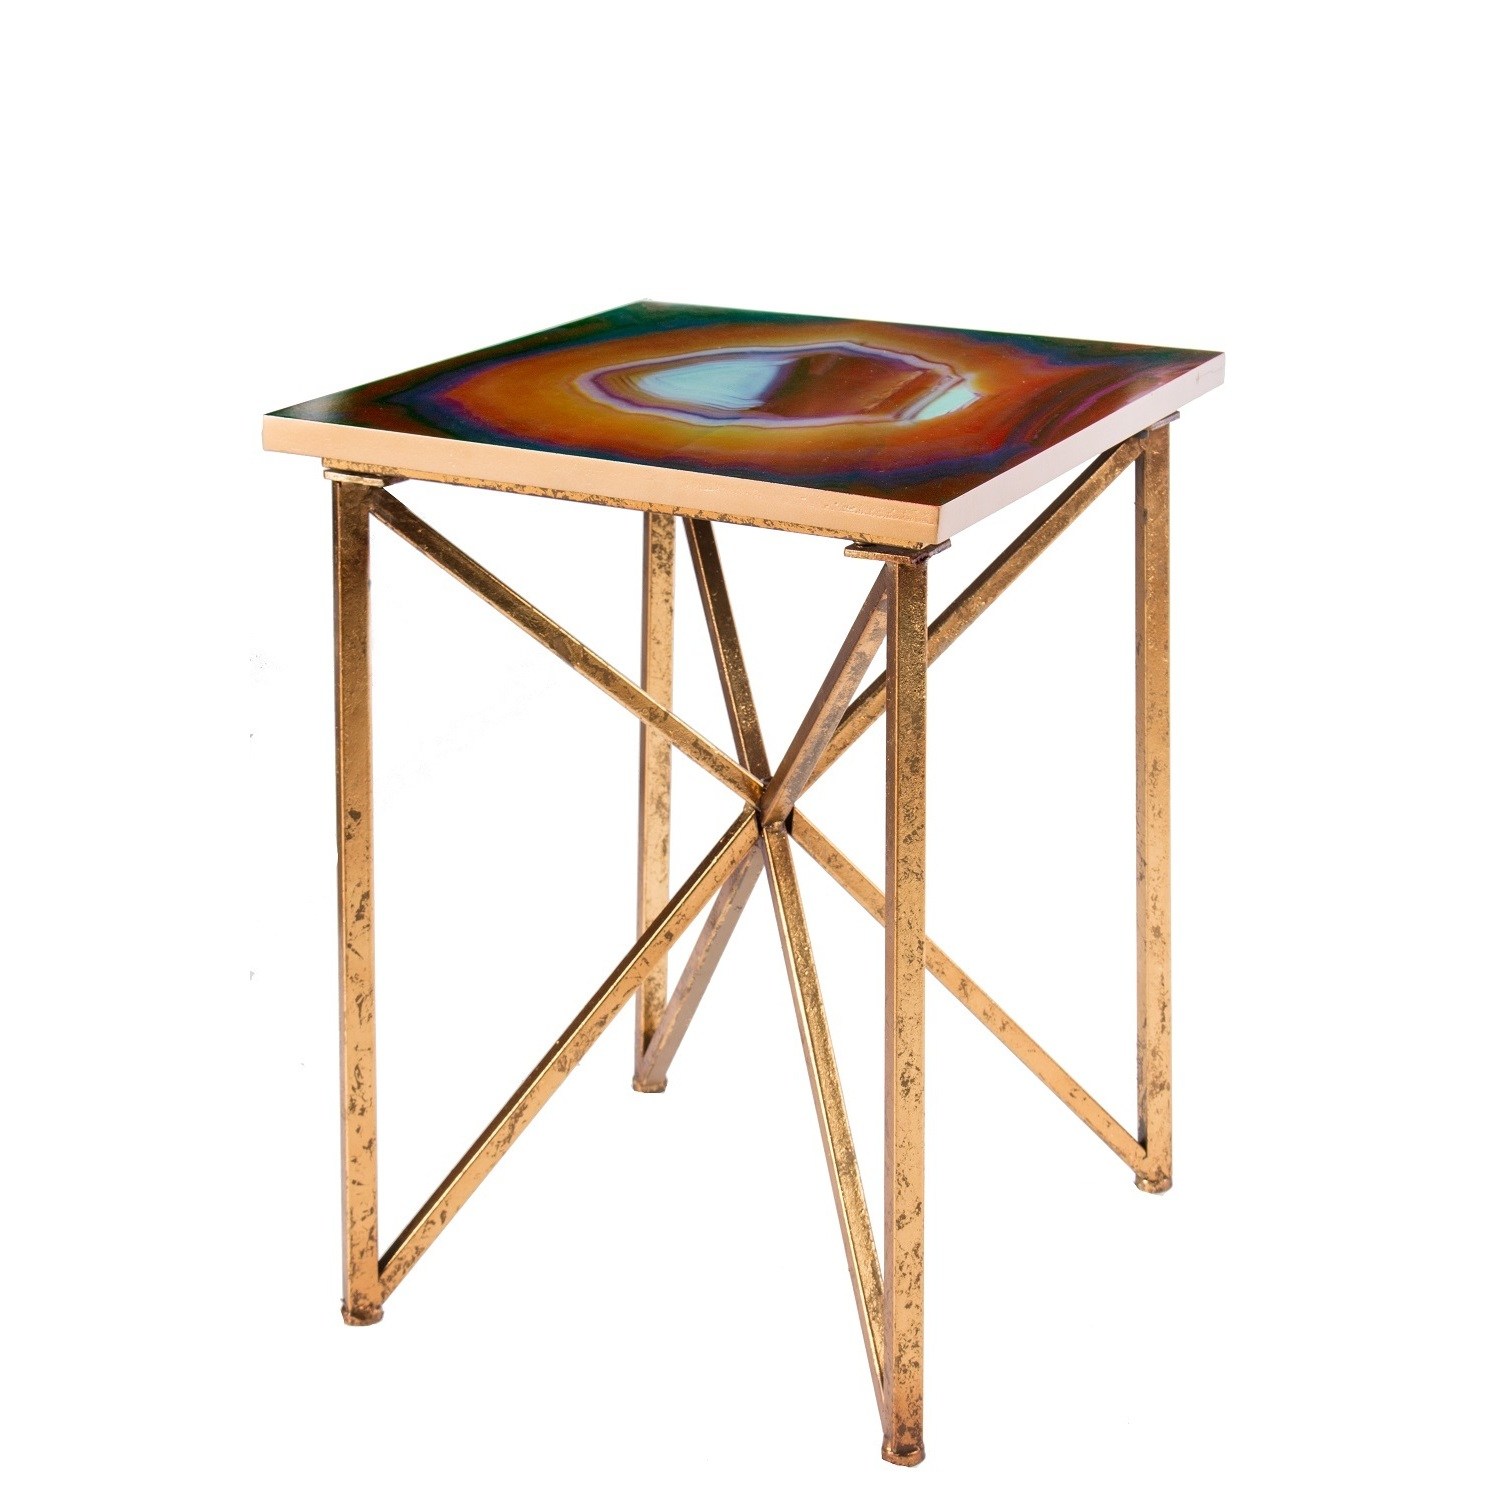 statements rouge agate side table inch tall free accent shipping today solid wood end with drawer wooden garden changing cover gold drum brass glass unique small tables uttermost